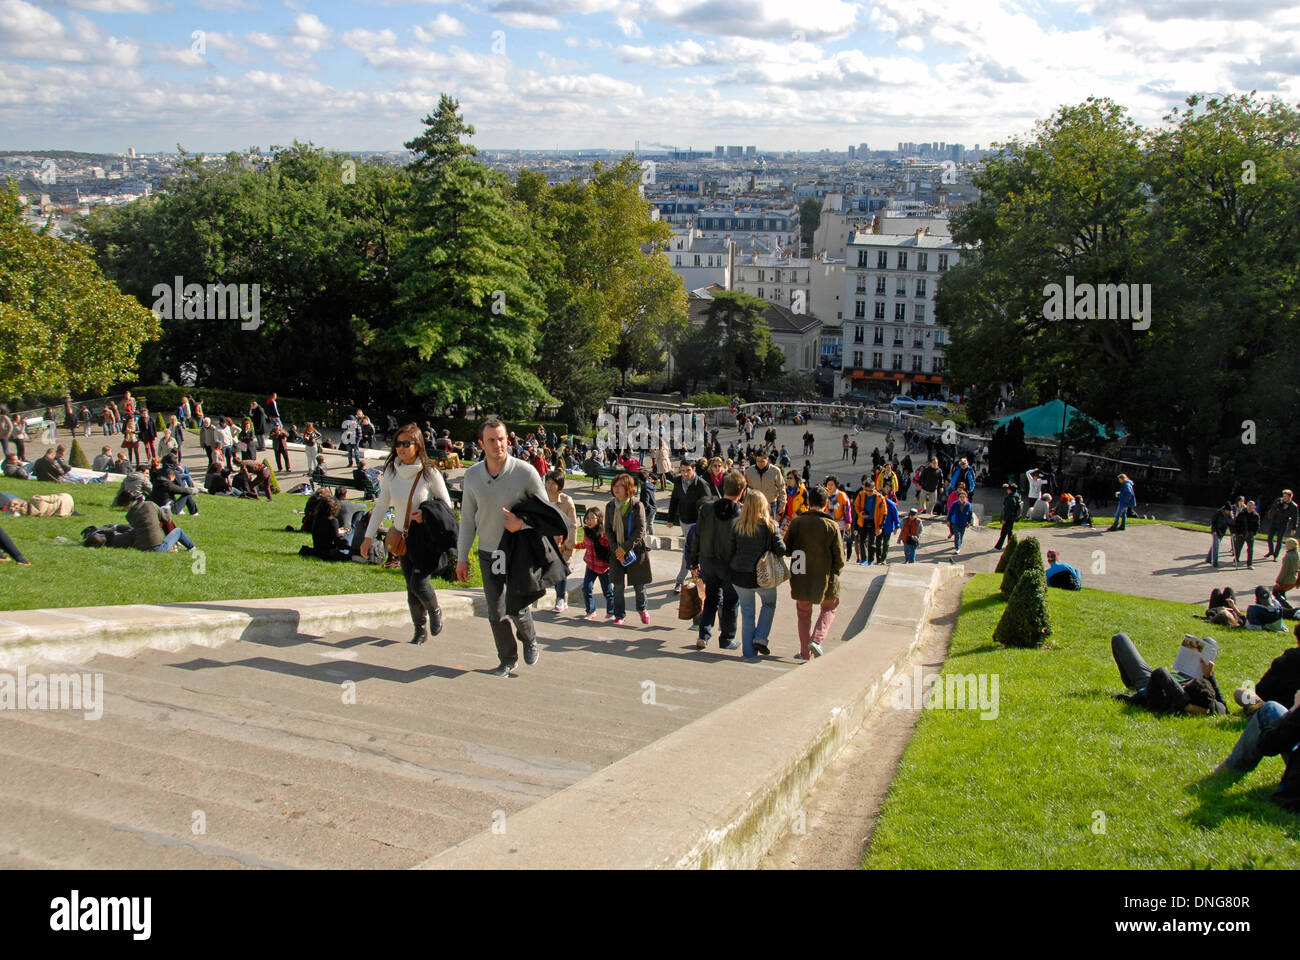 Crowds of people climbing the steps to Sacre Coeur basilica, Paris, France Stock Photo